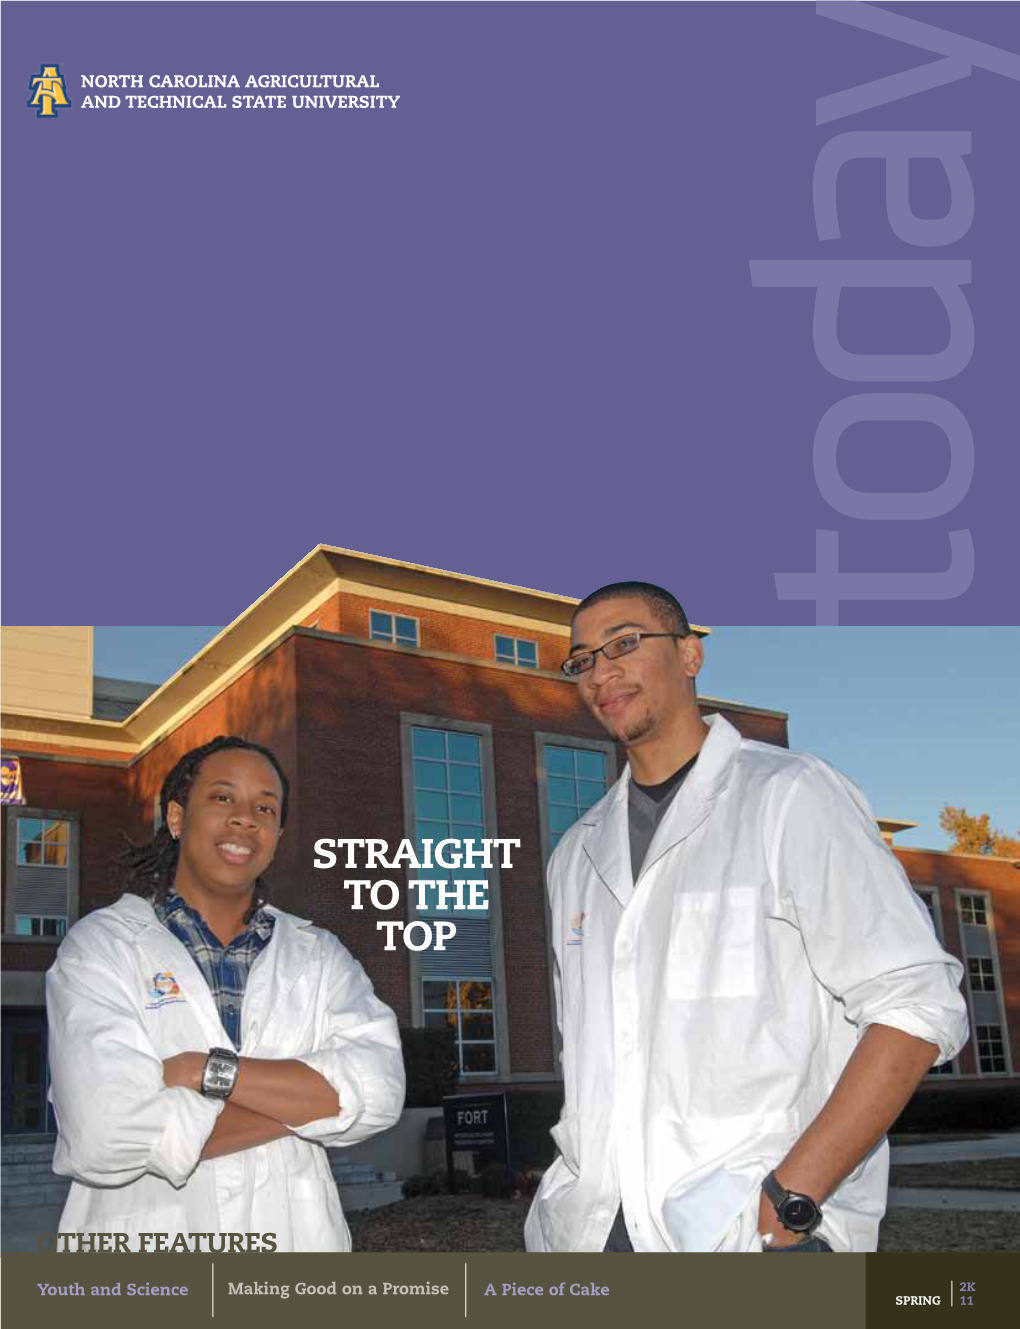 Straight to the Top 4-H Iswinningformula for STEM-Focused Nation Youth and Science Features Visit Usonlineat Ake Institution